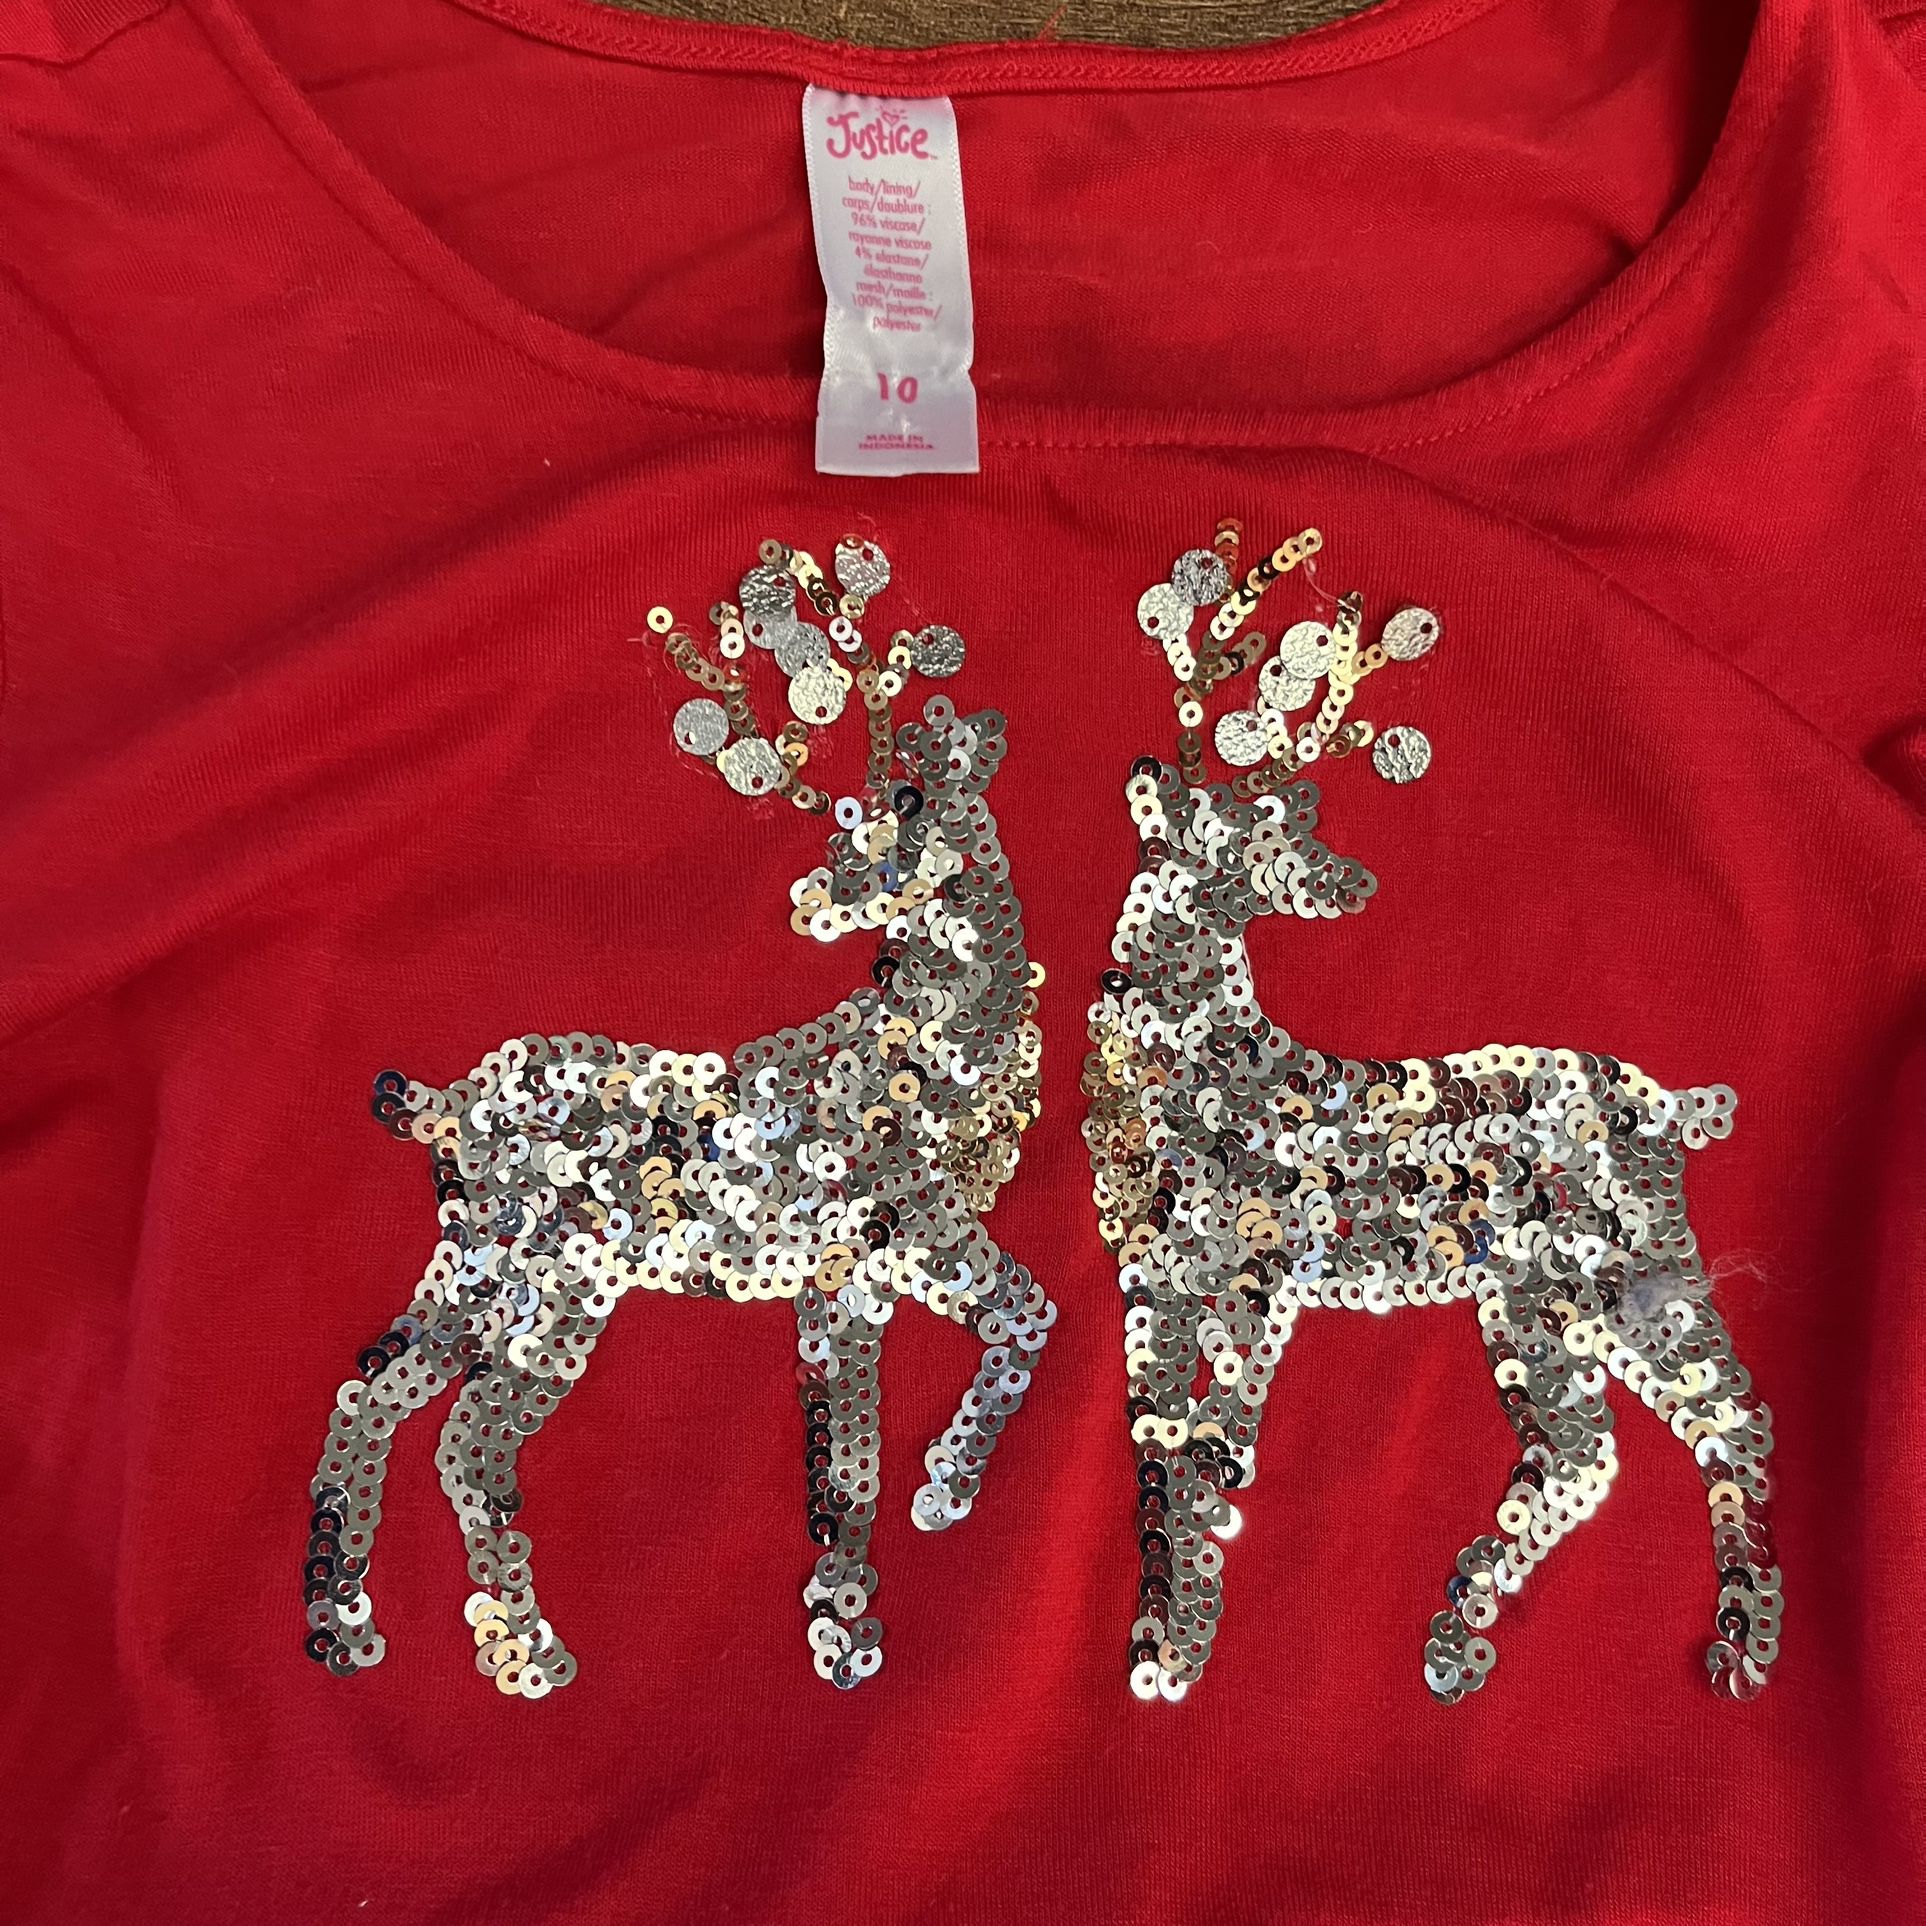 Justice Girls Youth Sequin & Tulle Reindeer Christmas Dress Sz 10